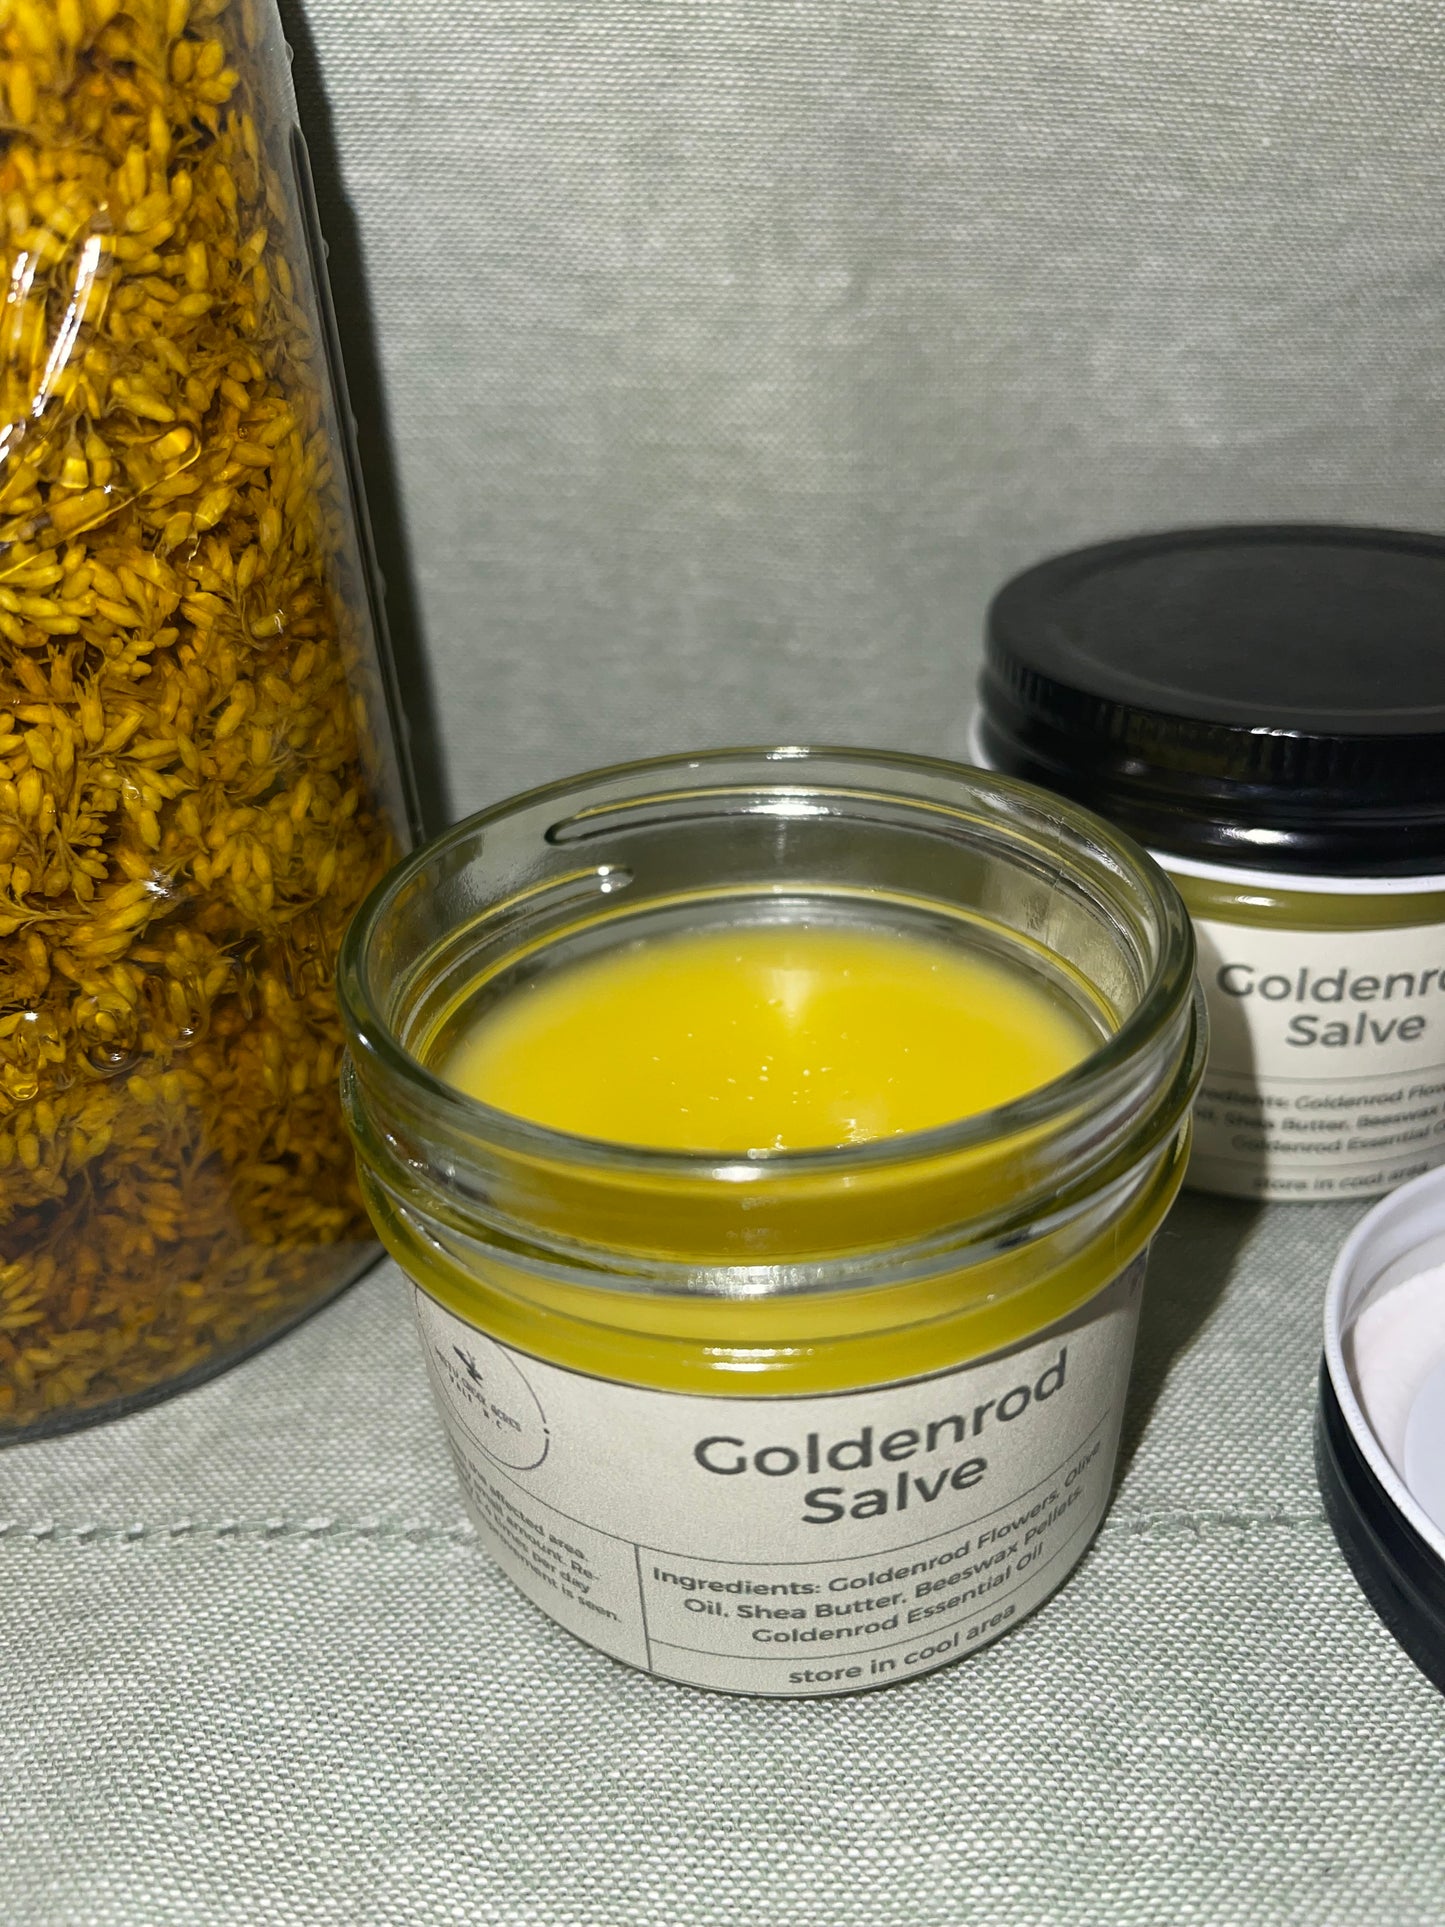 Goldenrod salve, homemade goldenrod salve, muscle relief salve, homemade salve for muscle relief, non-toxic muscle relief, small business salve, North Carolina goldenrod salve, homesteading products